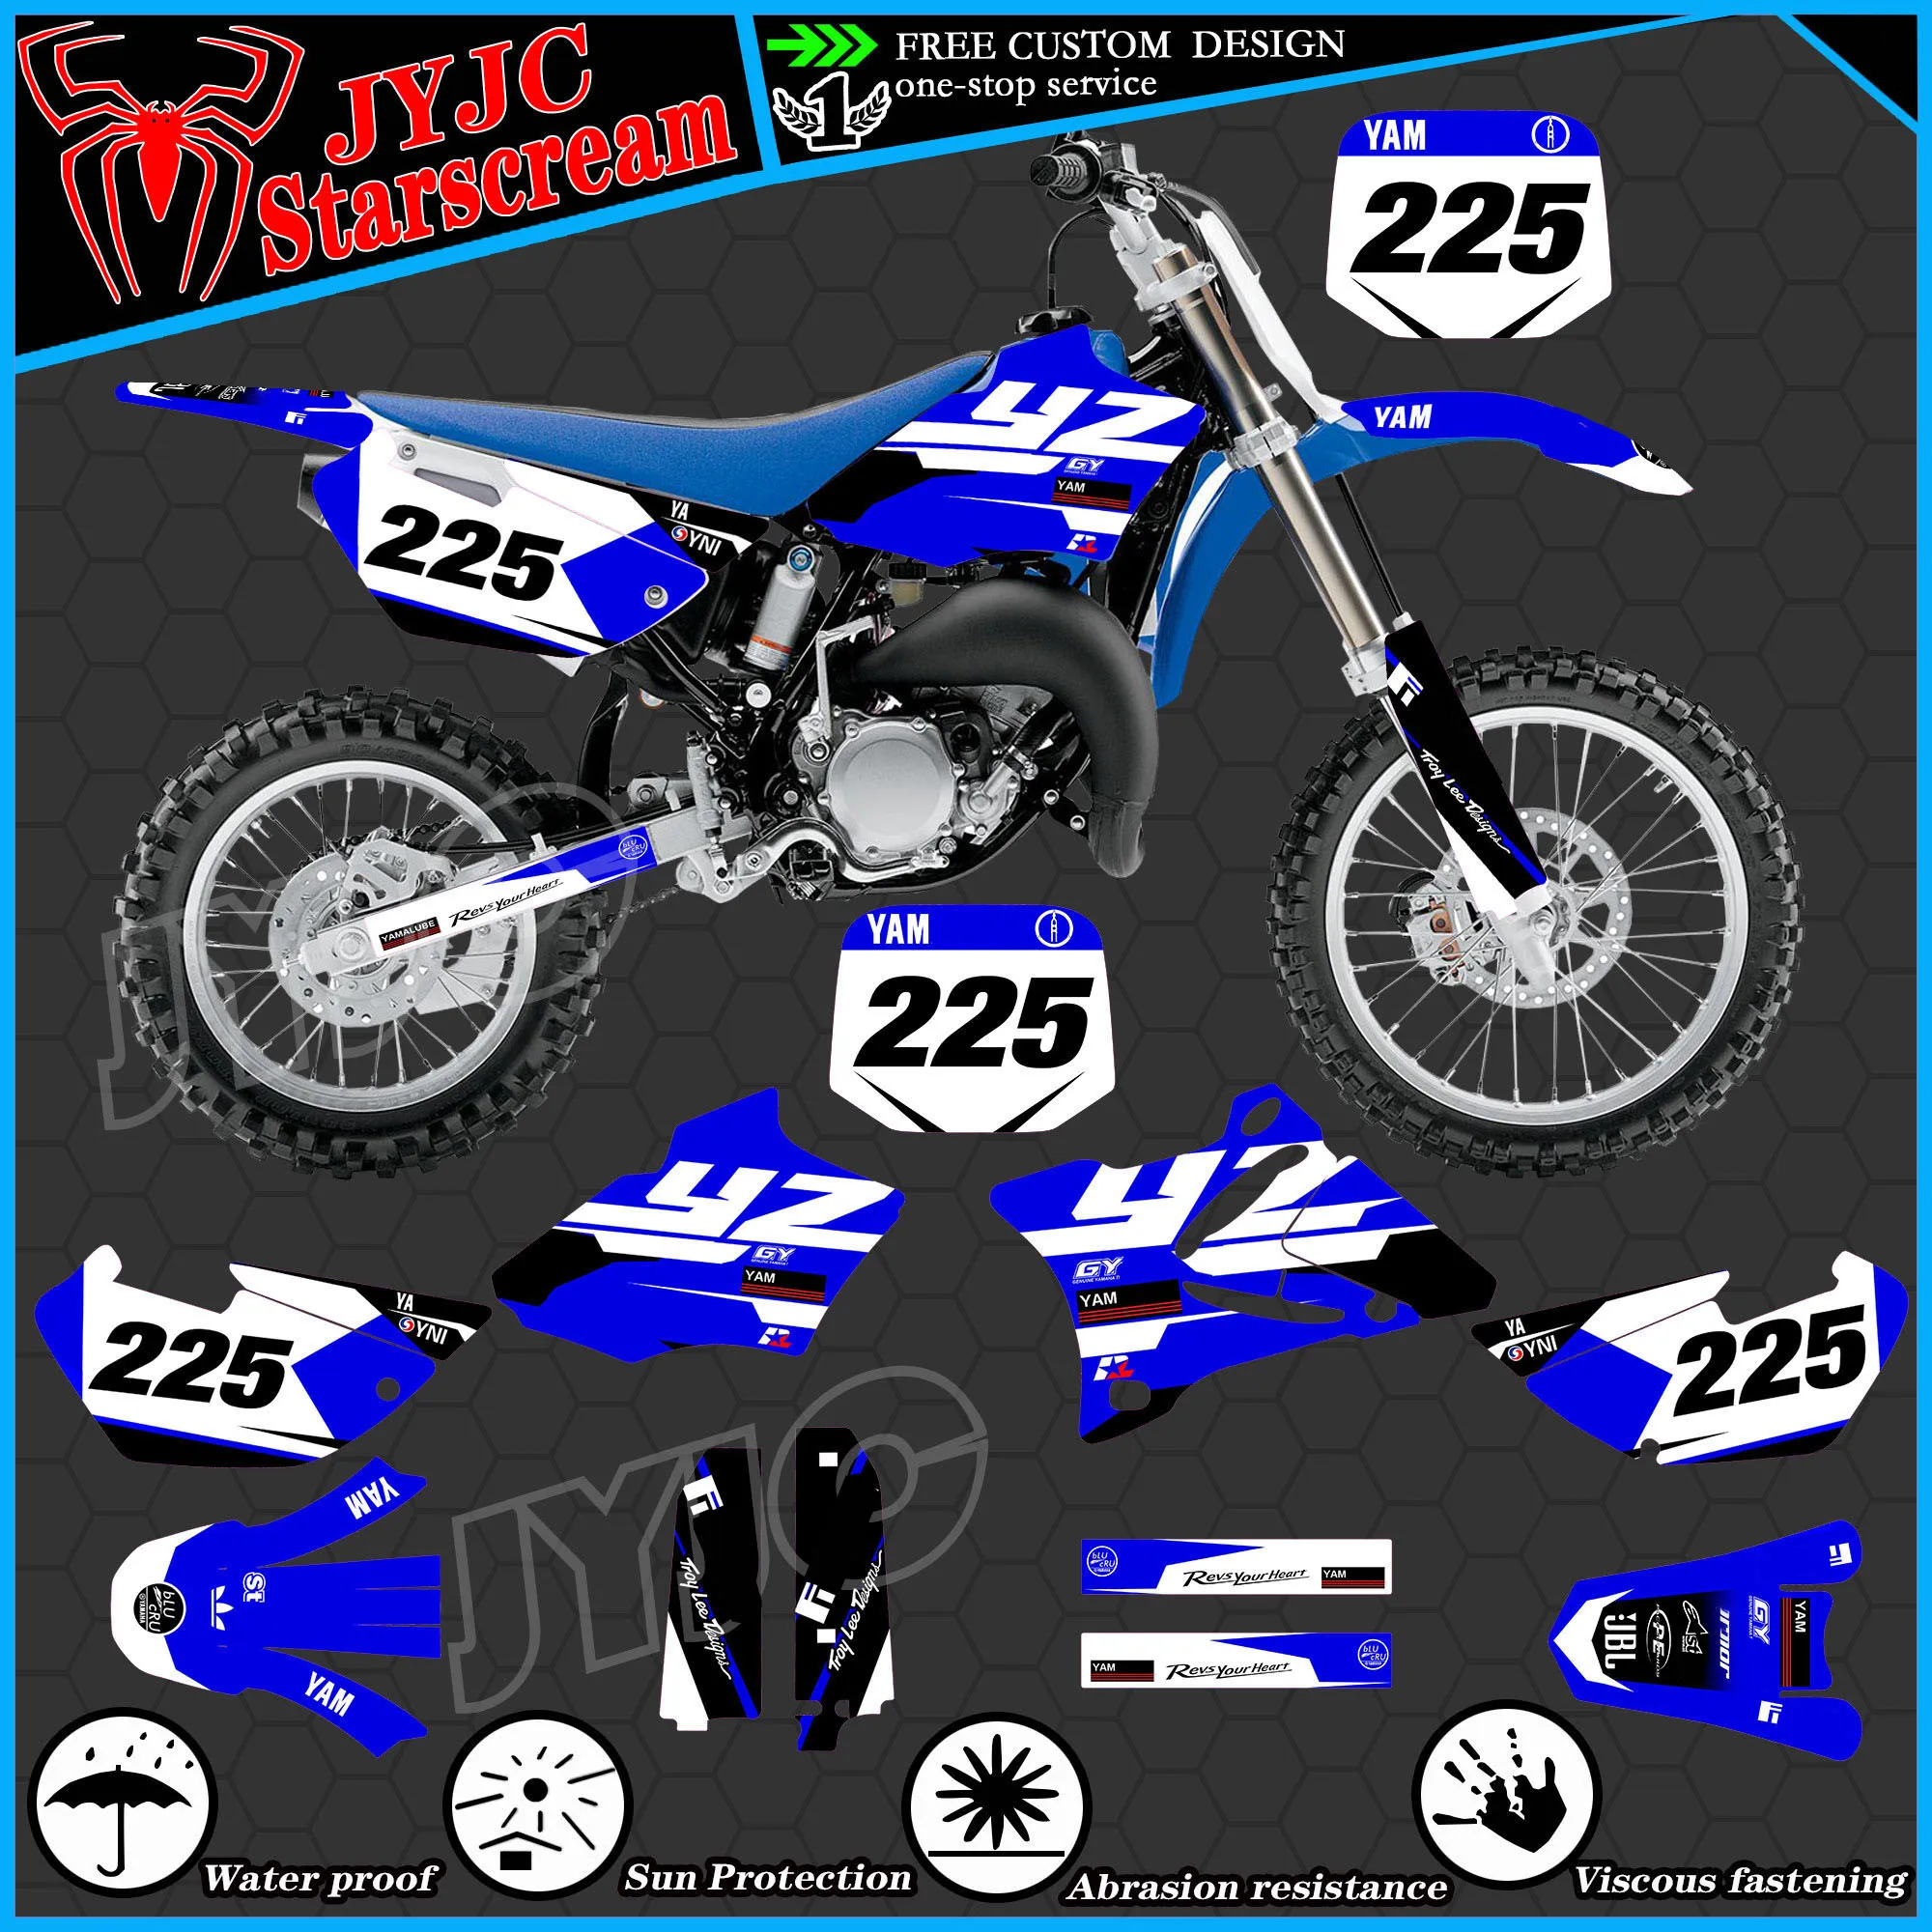 Graphic Kit for YAMAHA 2002 2003 2004 2005 2006 2007 2008 2009 2010 2011 2012 2013 2014 YZ85 Motorcycle Decal Stickers graphic kit for ktm 2003 2004 2005 2006 2007 2008 2009 2010 2011 2012 sx xc 85 sx xc105 motorcycle decal stickers